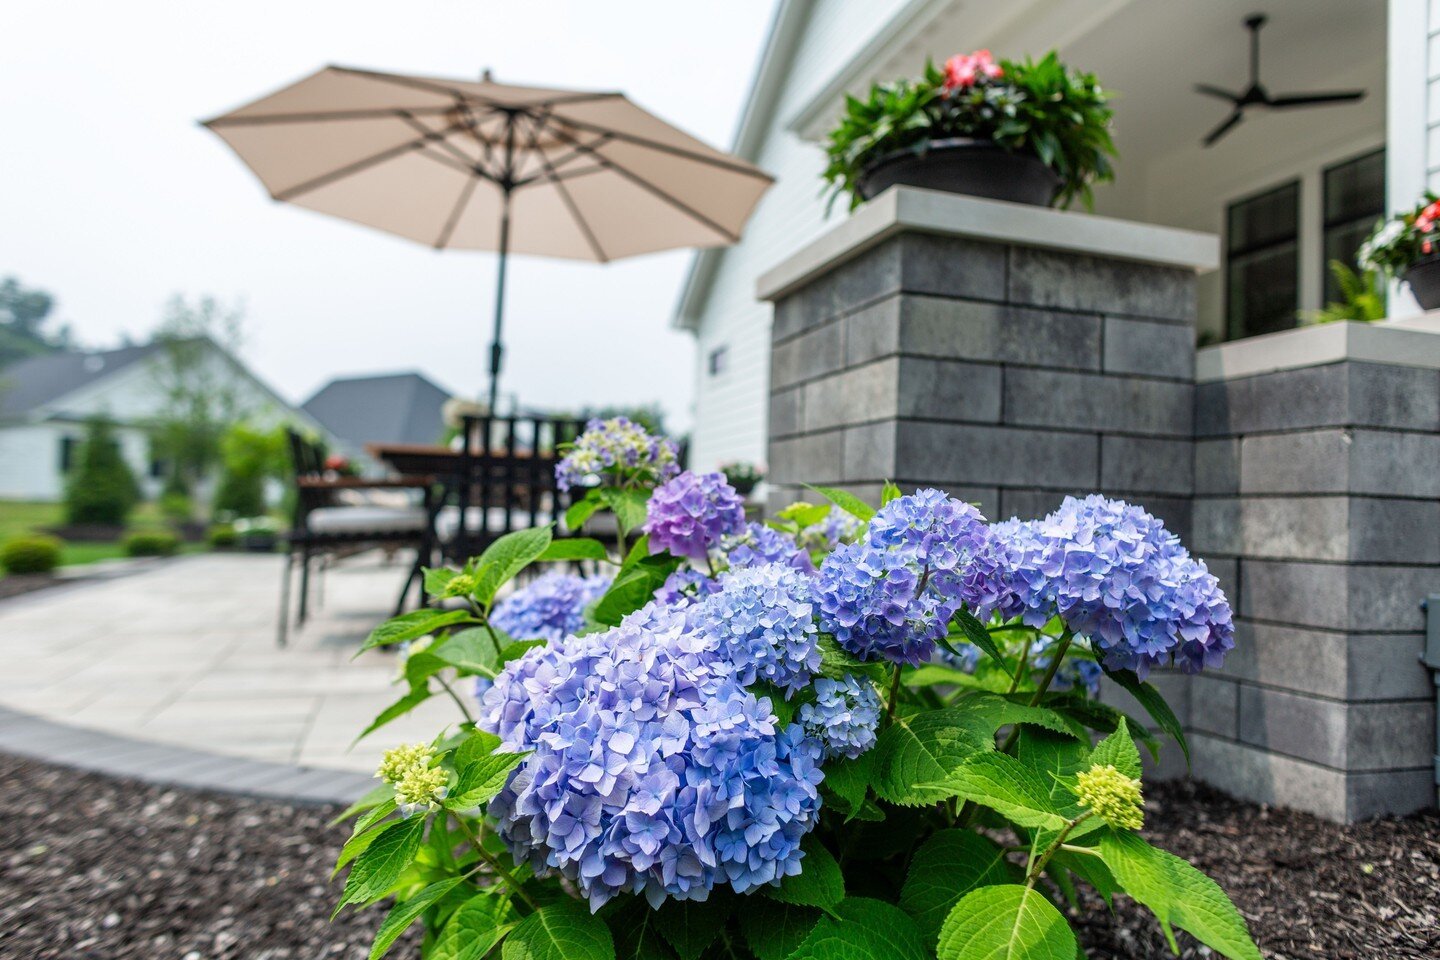 A pop of color goes a long way. Let's talk summer flora to make your outdoor space as perfect as it can be for this summer. 

#columbuslandscaping #columbusgardens #yarddesign #luxurylandscaping #backyardenvy #dreambackyards #hydrangeabush #westervil